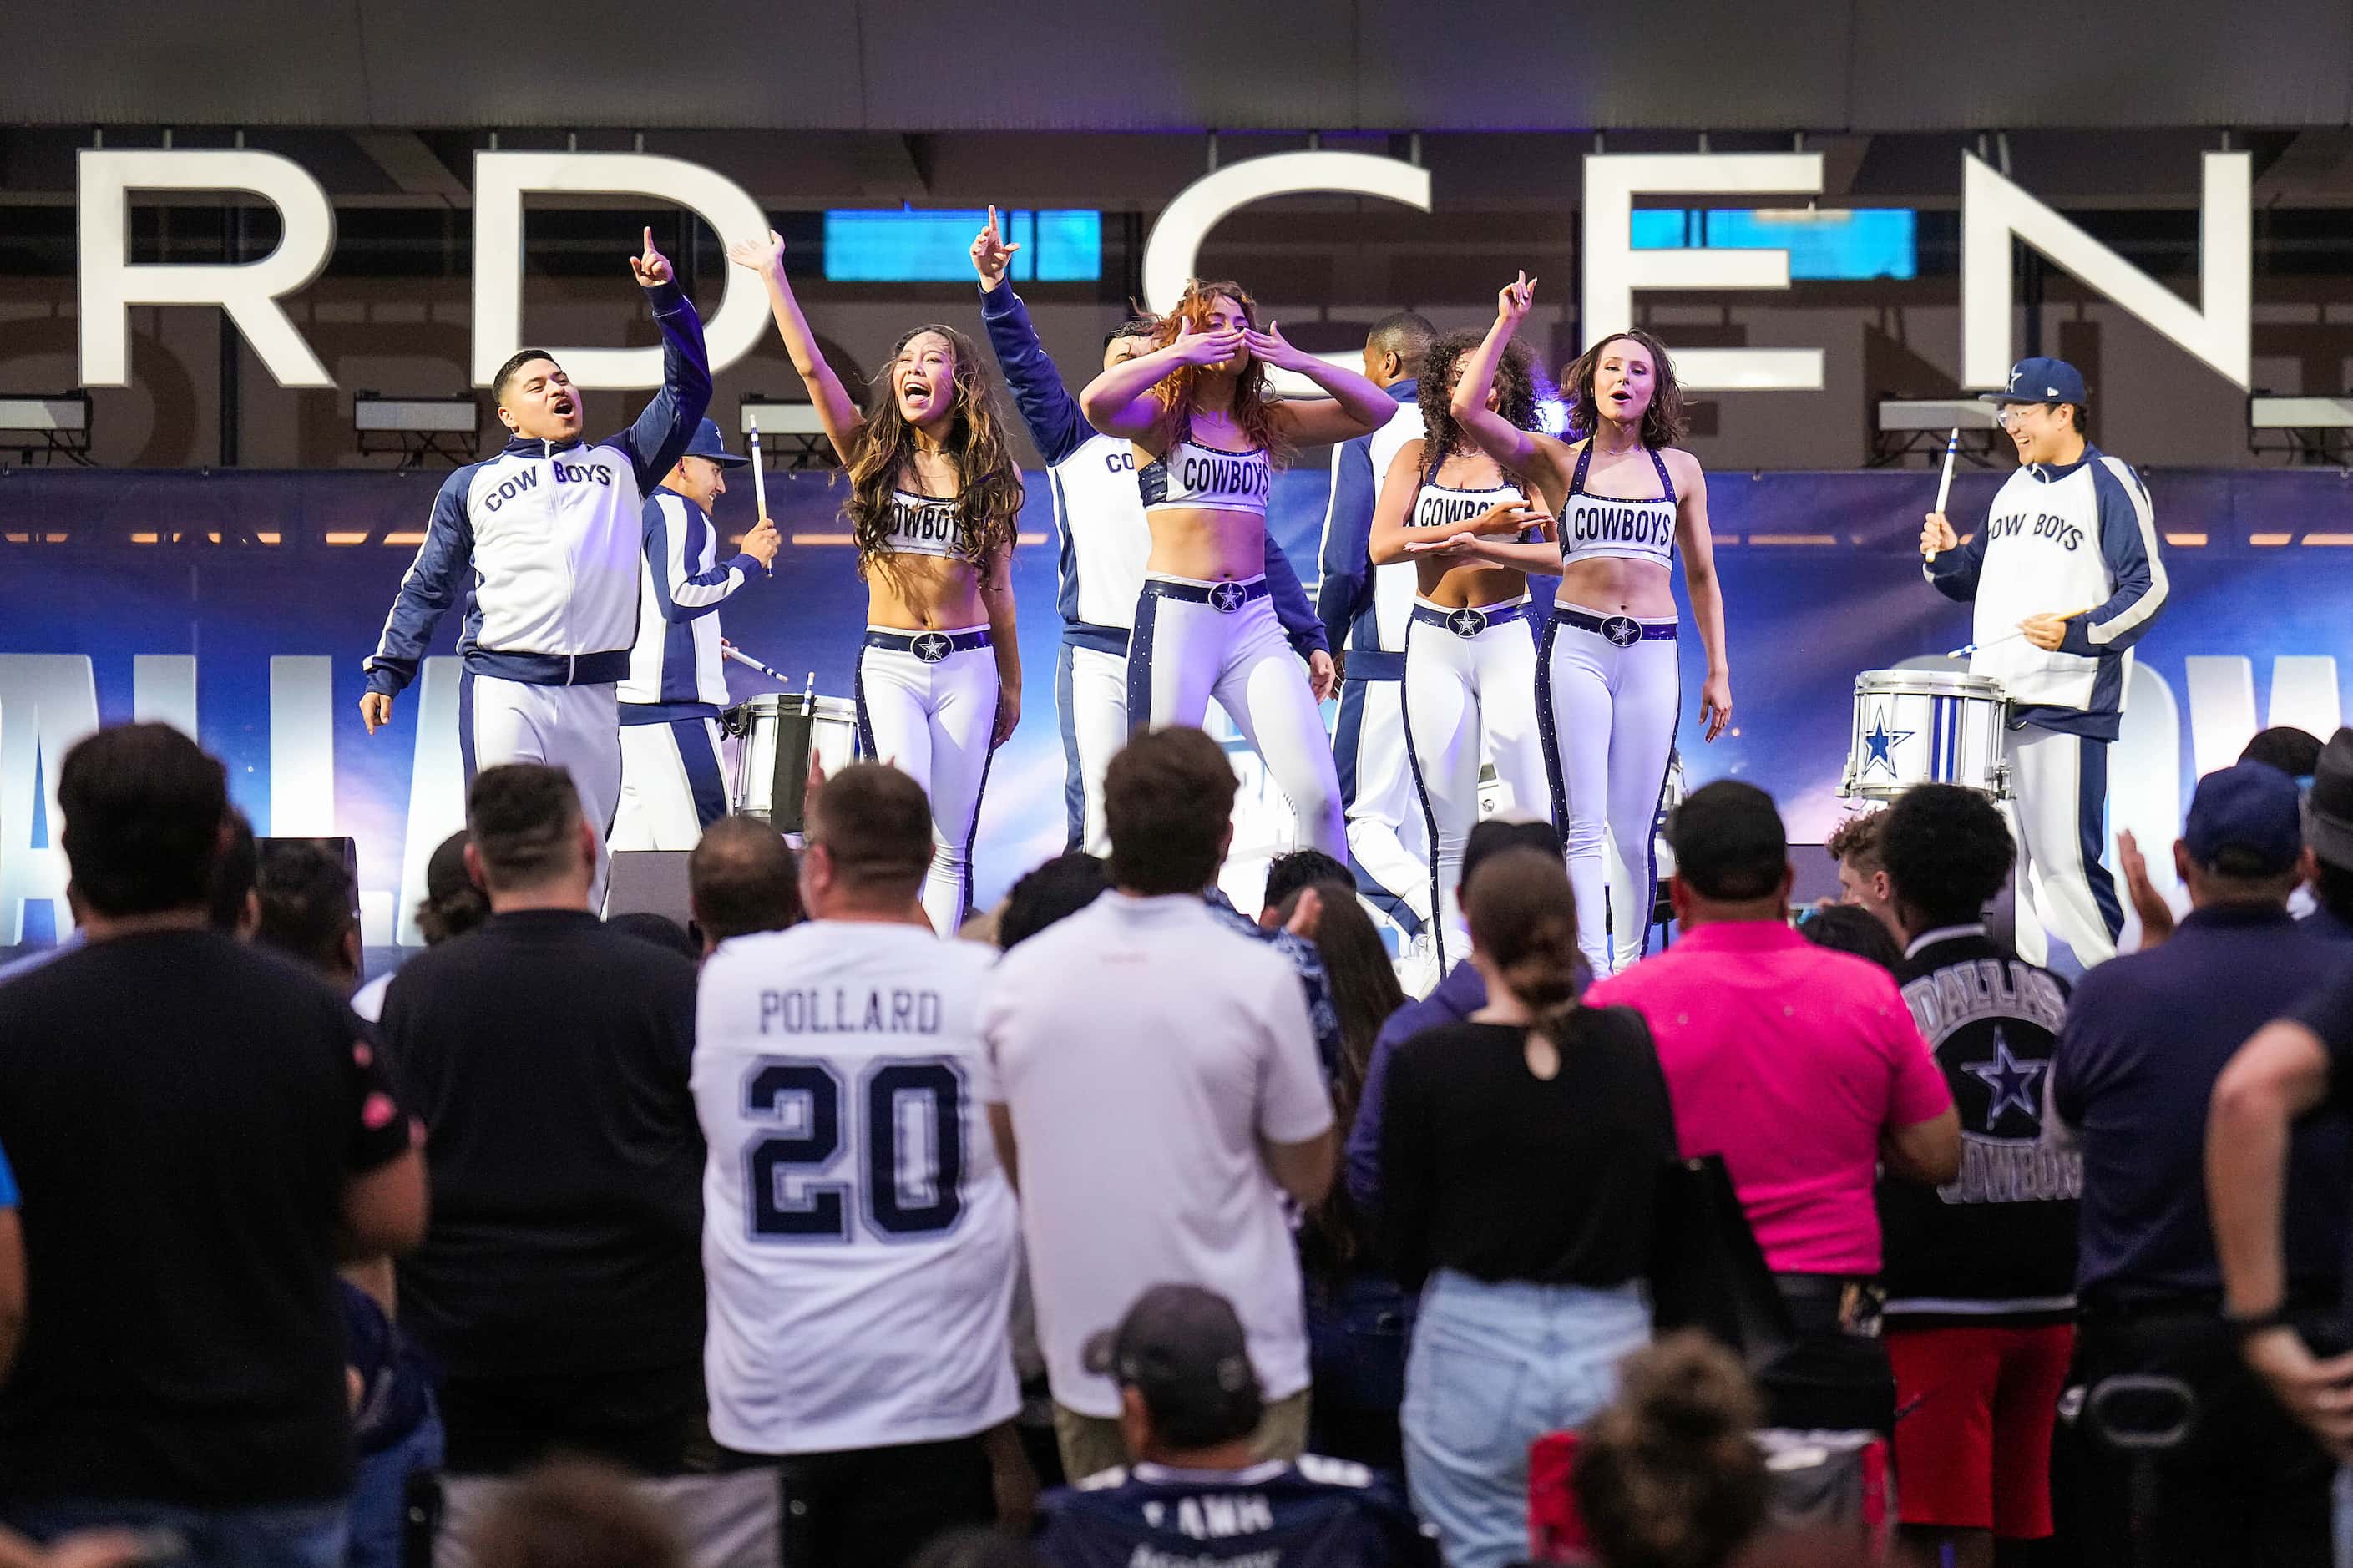 The Dallas Cowboys Rhythm & Blue dance team performs during a draft party for the first...